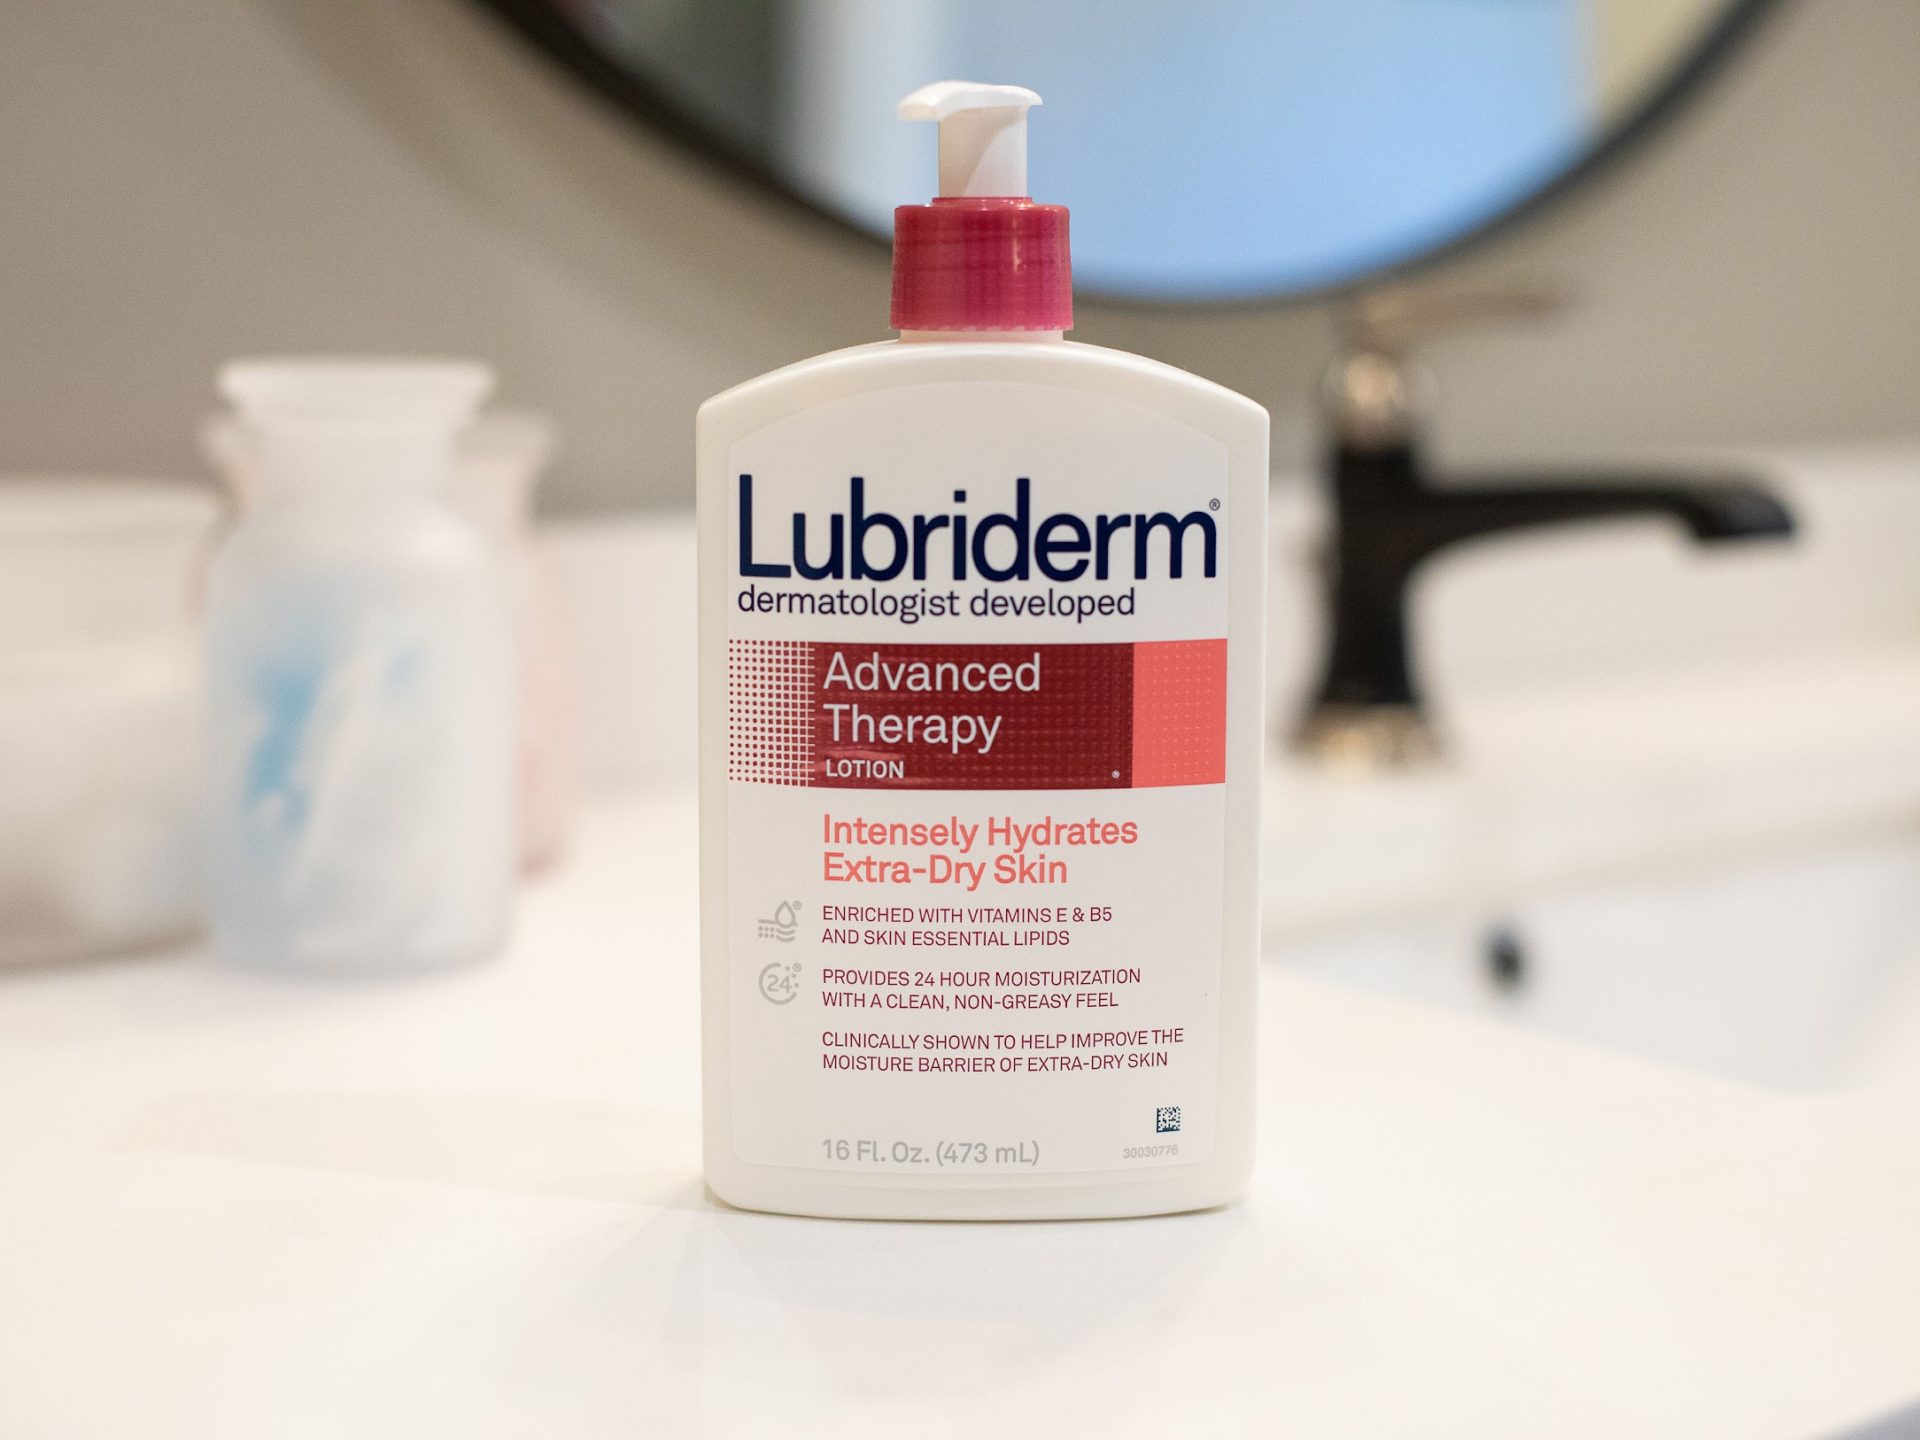 Lubriderm Lotion As Low As $3.99 At Kroger (Regular Price $8.79)